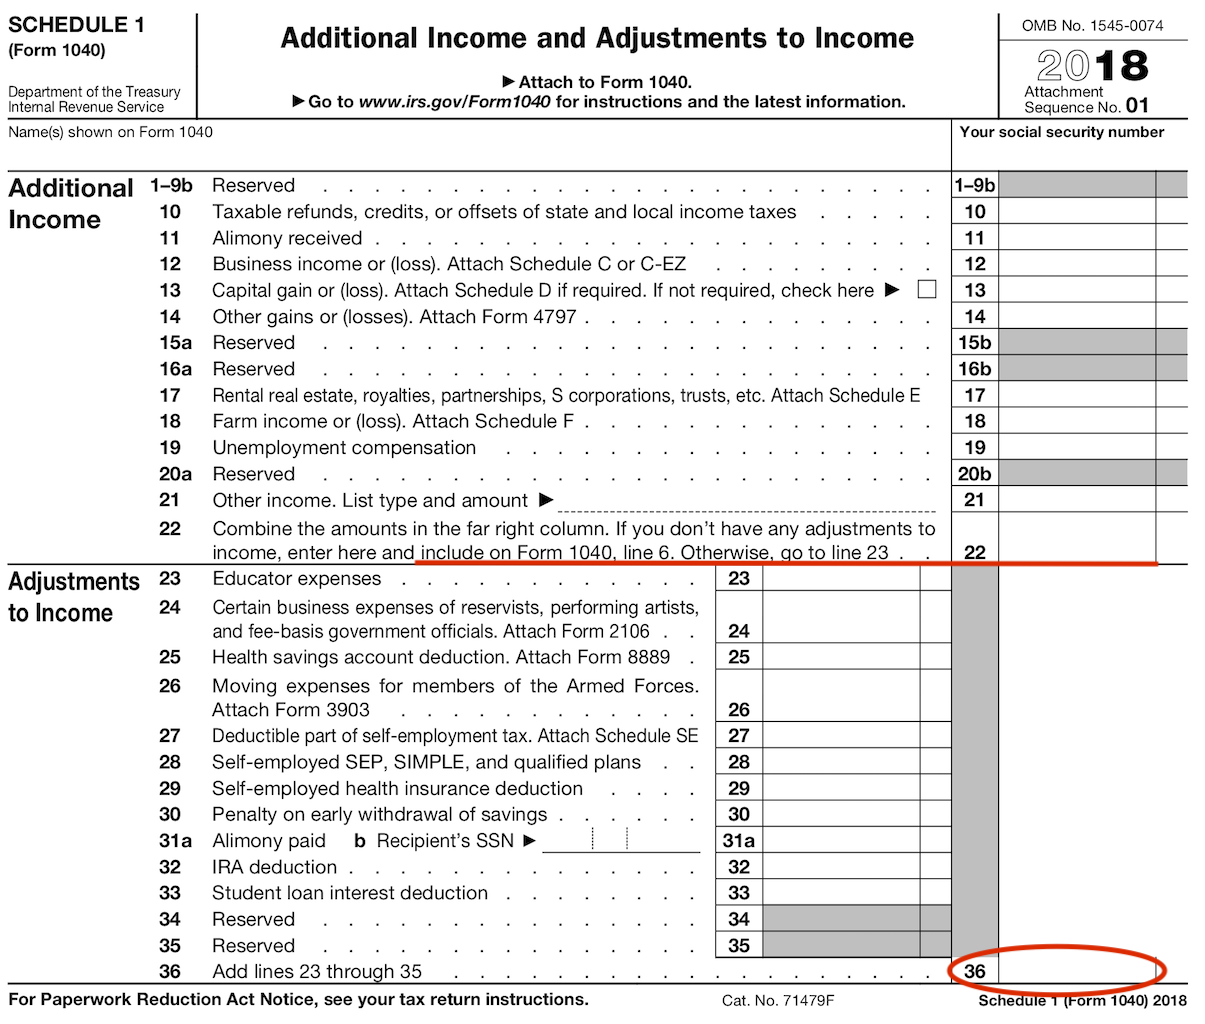 form 1040 box 1
 Describes new Form 6, Schedules & Tax Tables